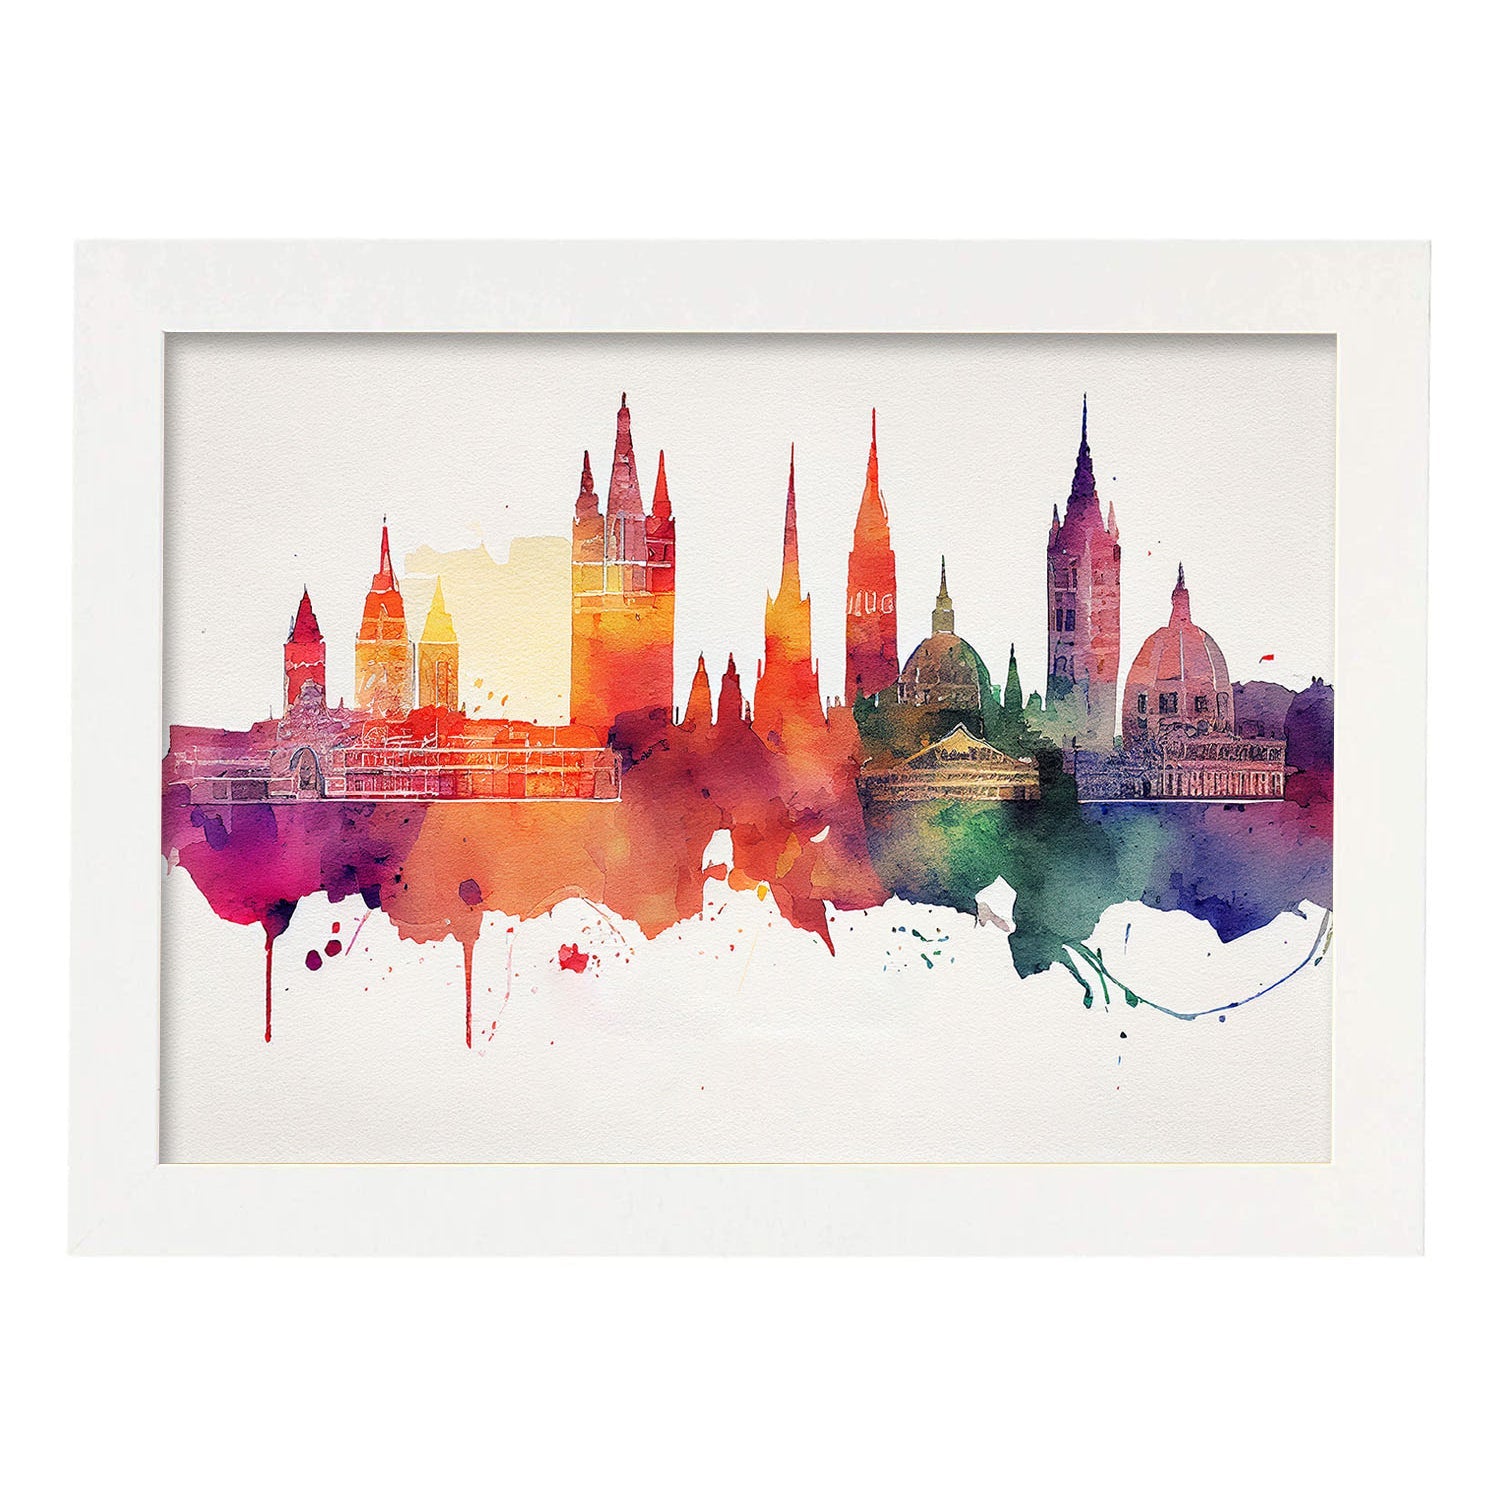 Nacnic watercolor of a skyline of the city of Vienna_3. Aesthetic Wall Art Prints for Bedroom or Living Room Design.-Artwork-Nacnic-A4-Marco Blanco-Nacnic Estudio SL